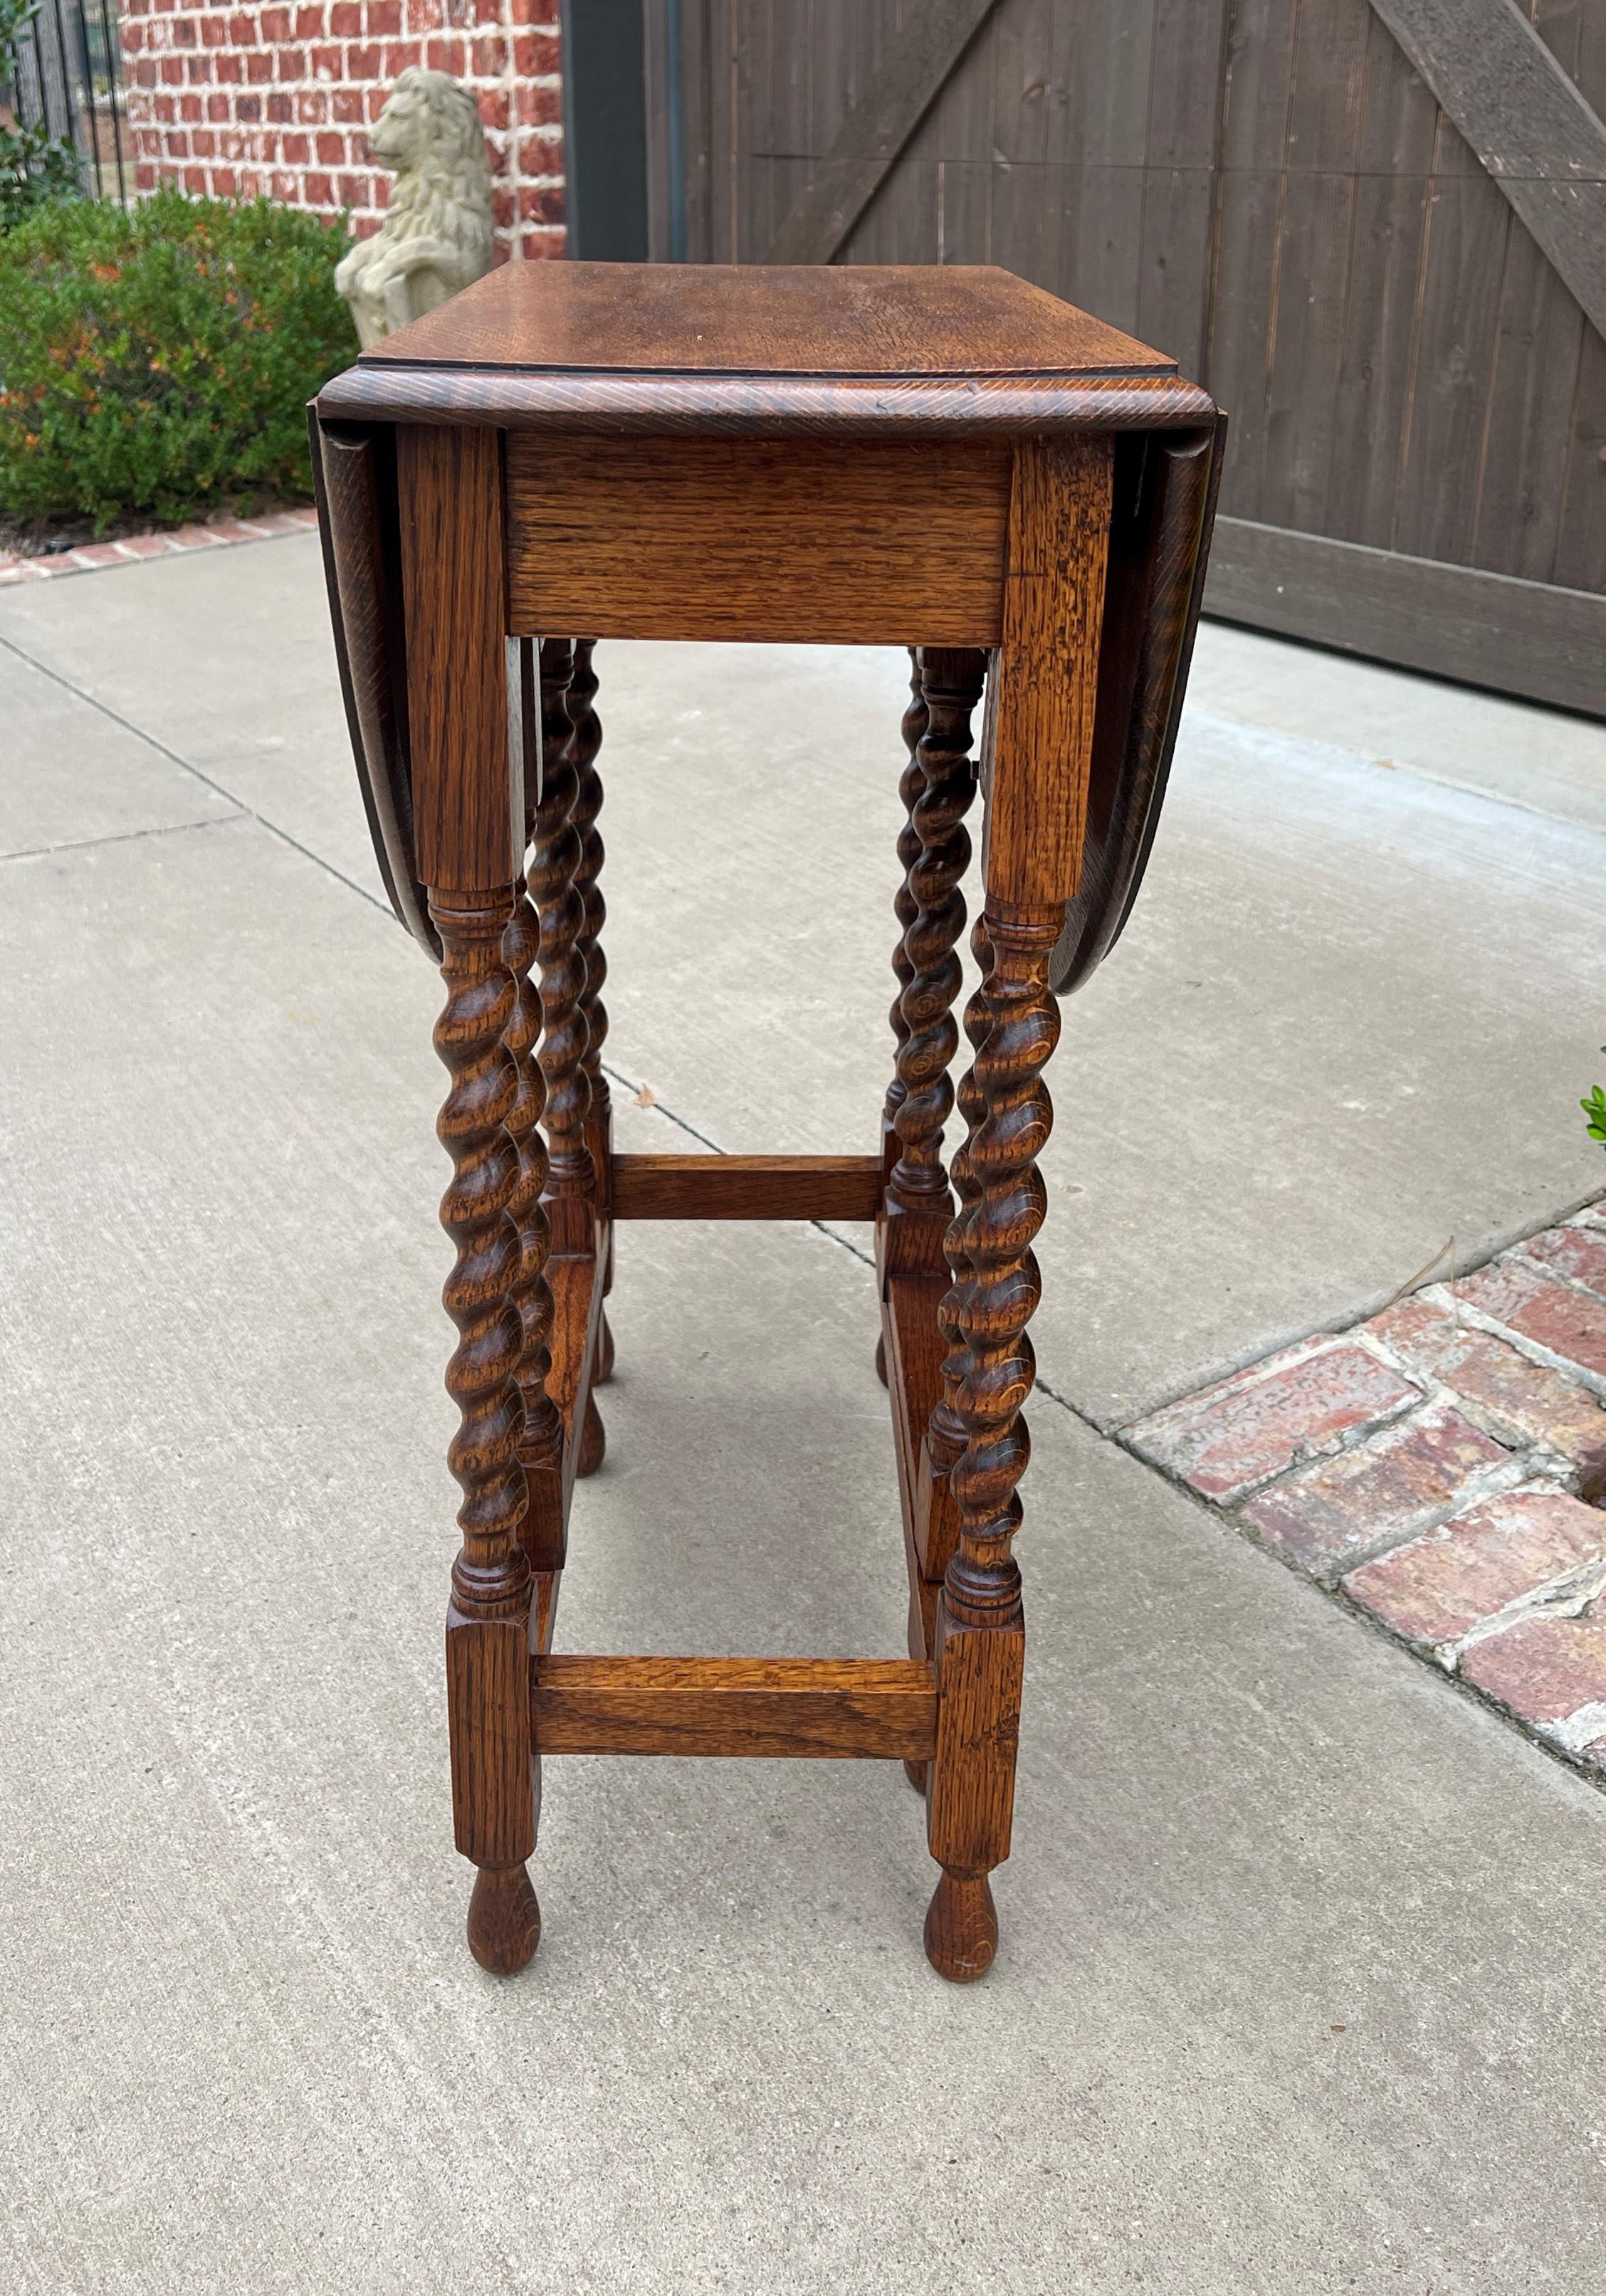 Charming and petite antique English honey oak drop leaf gateleg oval table with barley twist legs #1~~circa 1930s
Always in high demand~~hard-to-find petite size drop leaf gateleg table
Solid and sturdy~~nice oak patina
Measures: 28.25